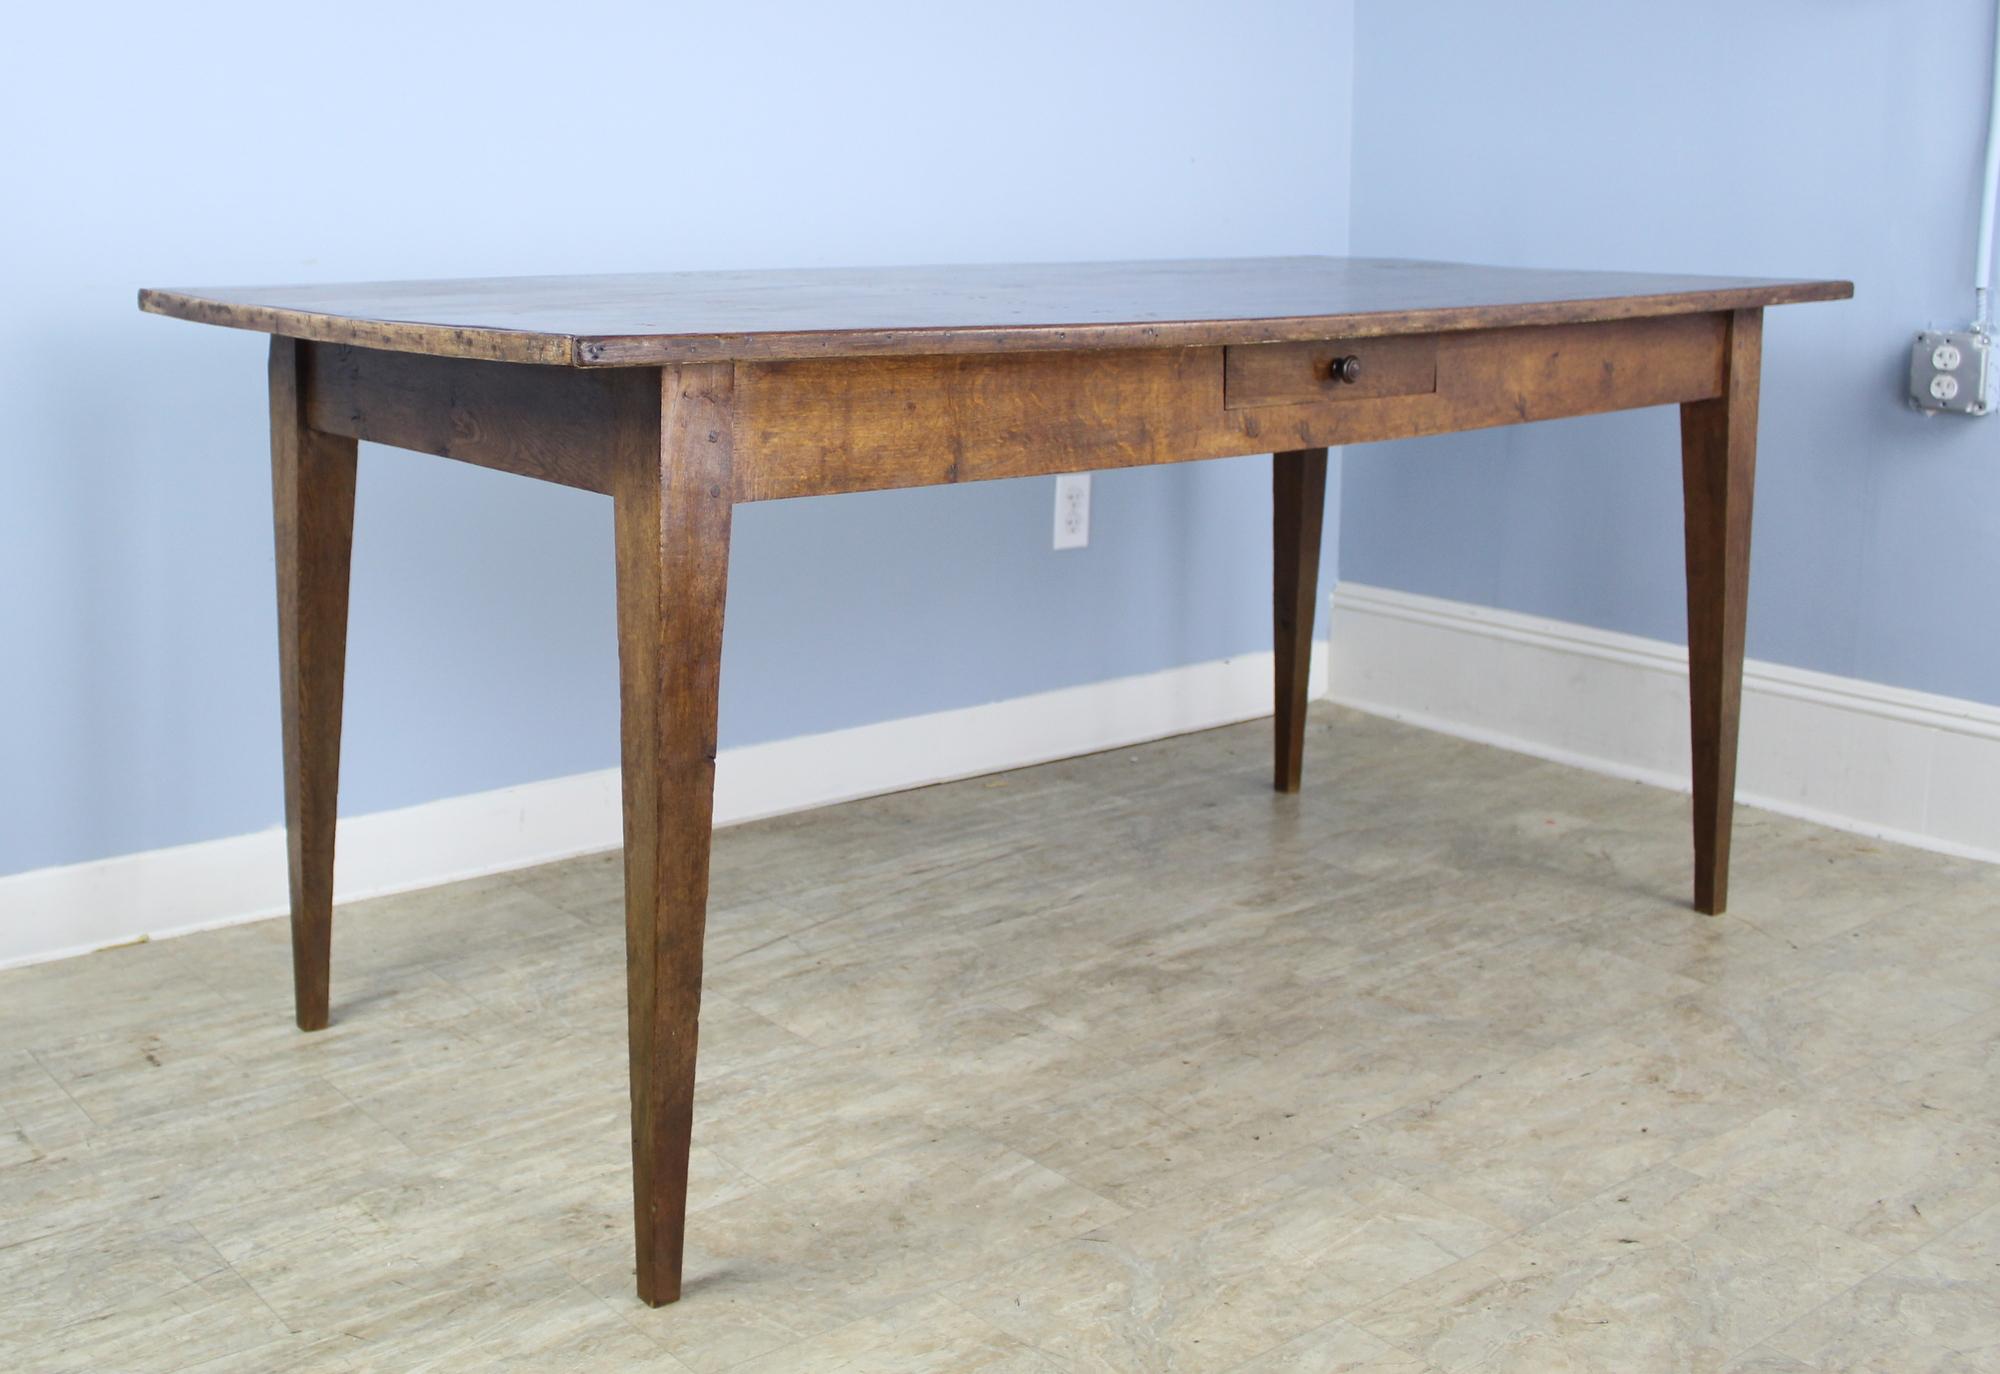 A charming French oak farm table with lots of visual impact. Notably a sturdy and attractive decorative edge and a carved single center drawer. 25